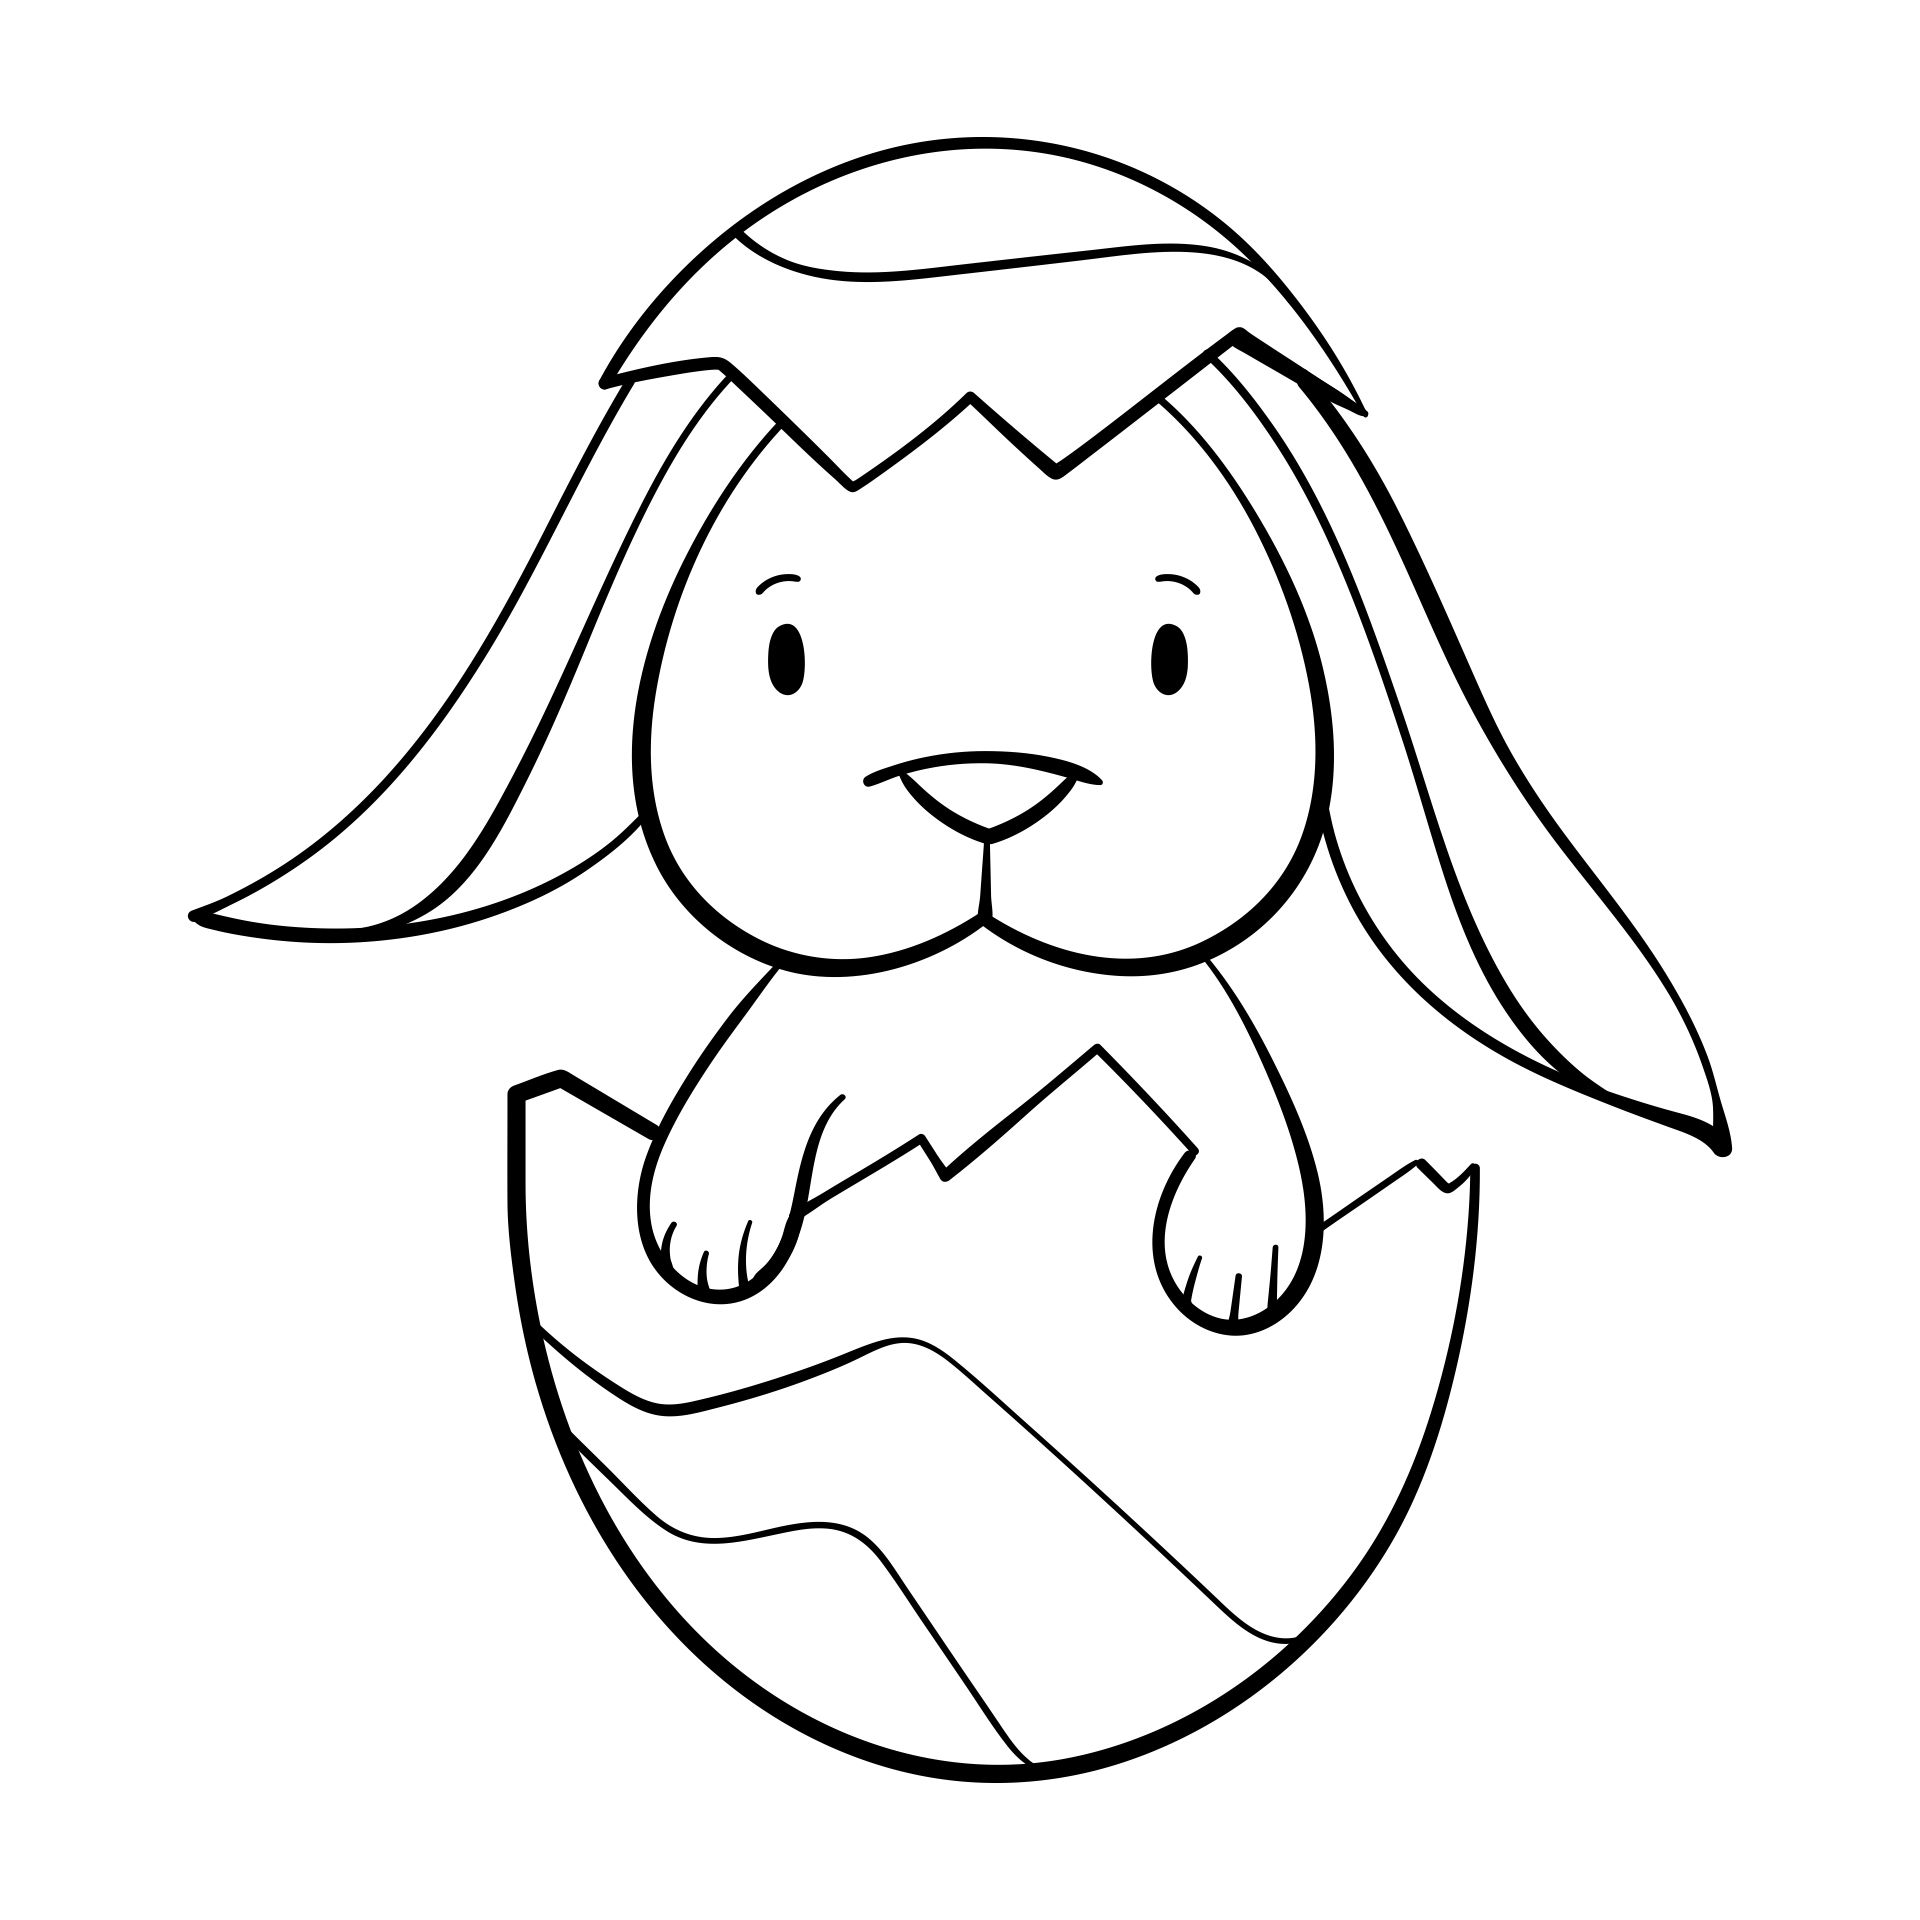 Printable Easter Bunny In Easter Egg Coloring Page